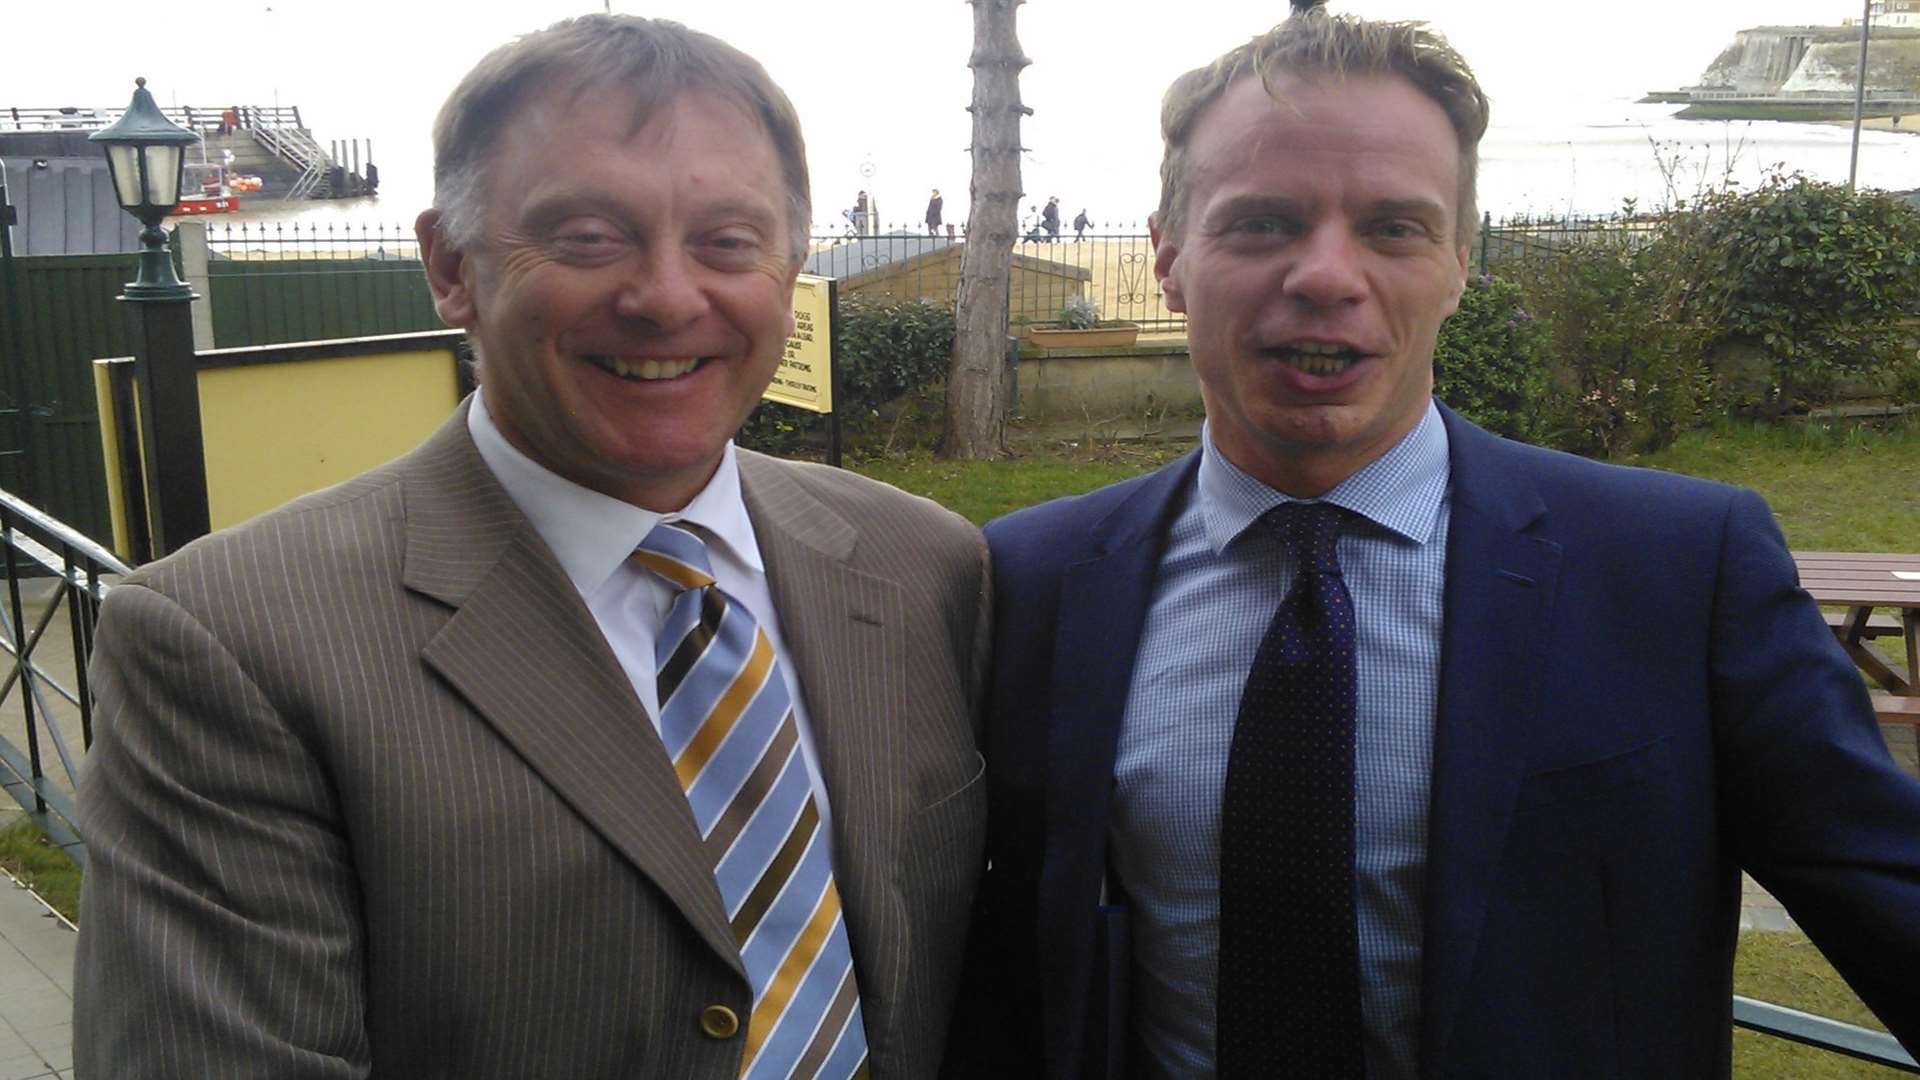 Russ Timpson (left) and Stephen Gilbert MP (right) at The Pavilion in Broadstairs.